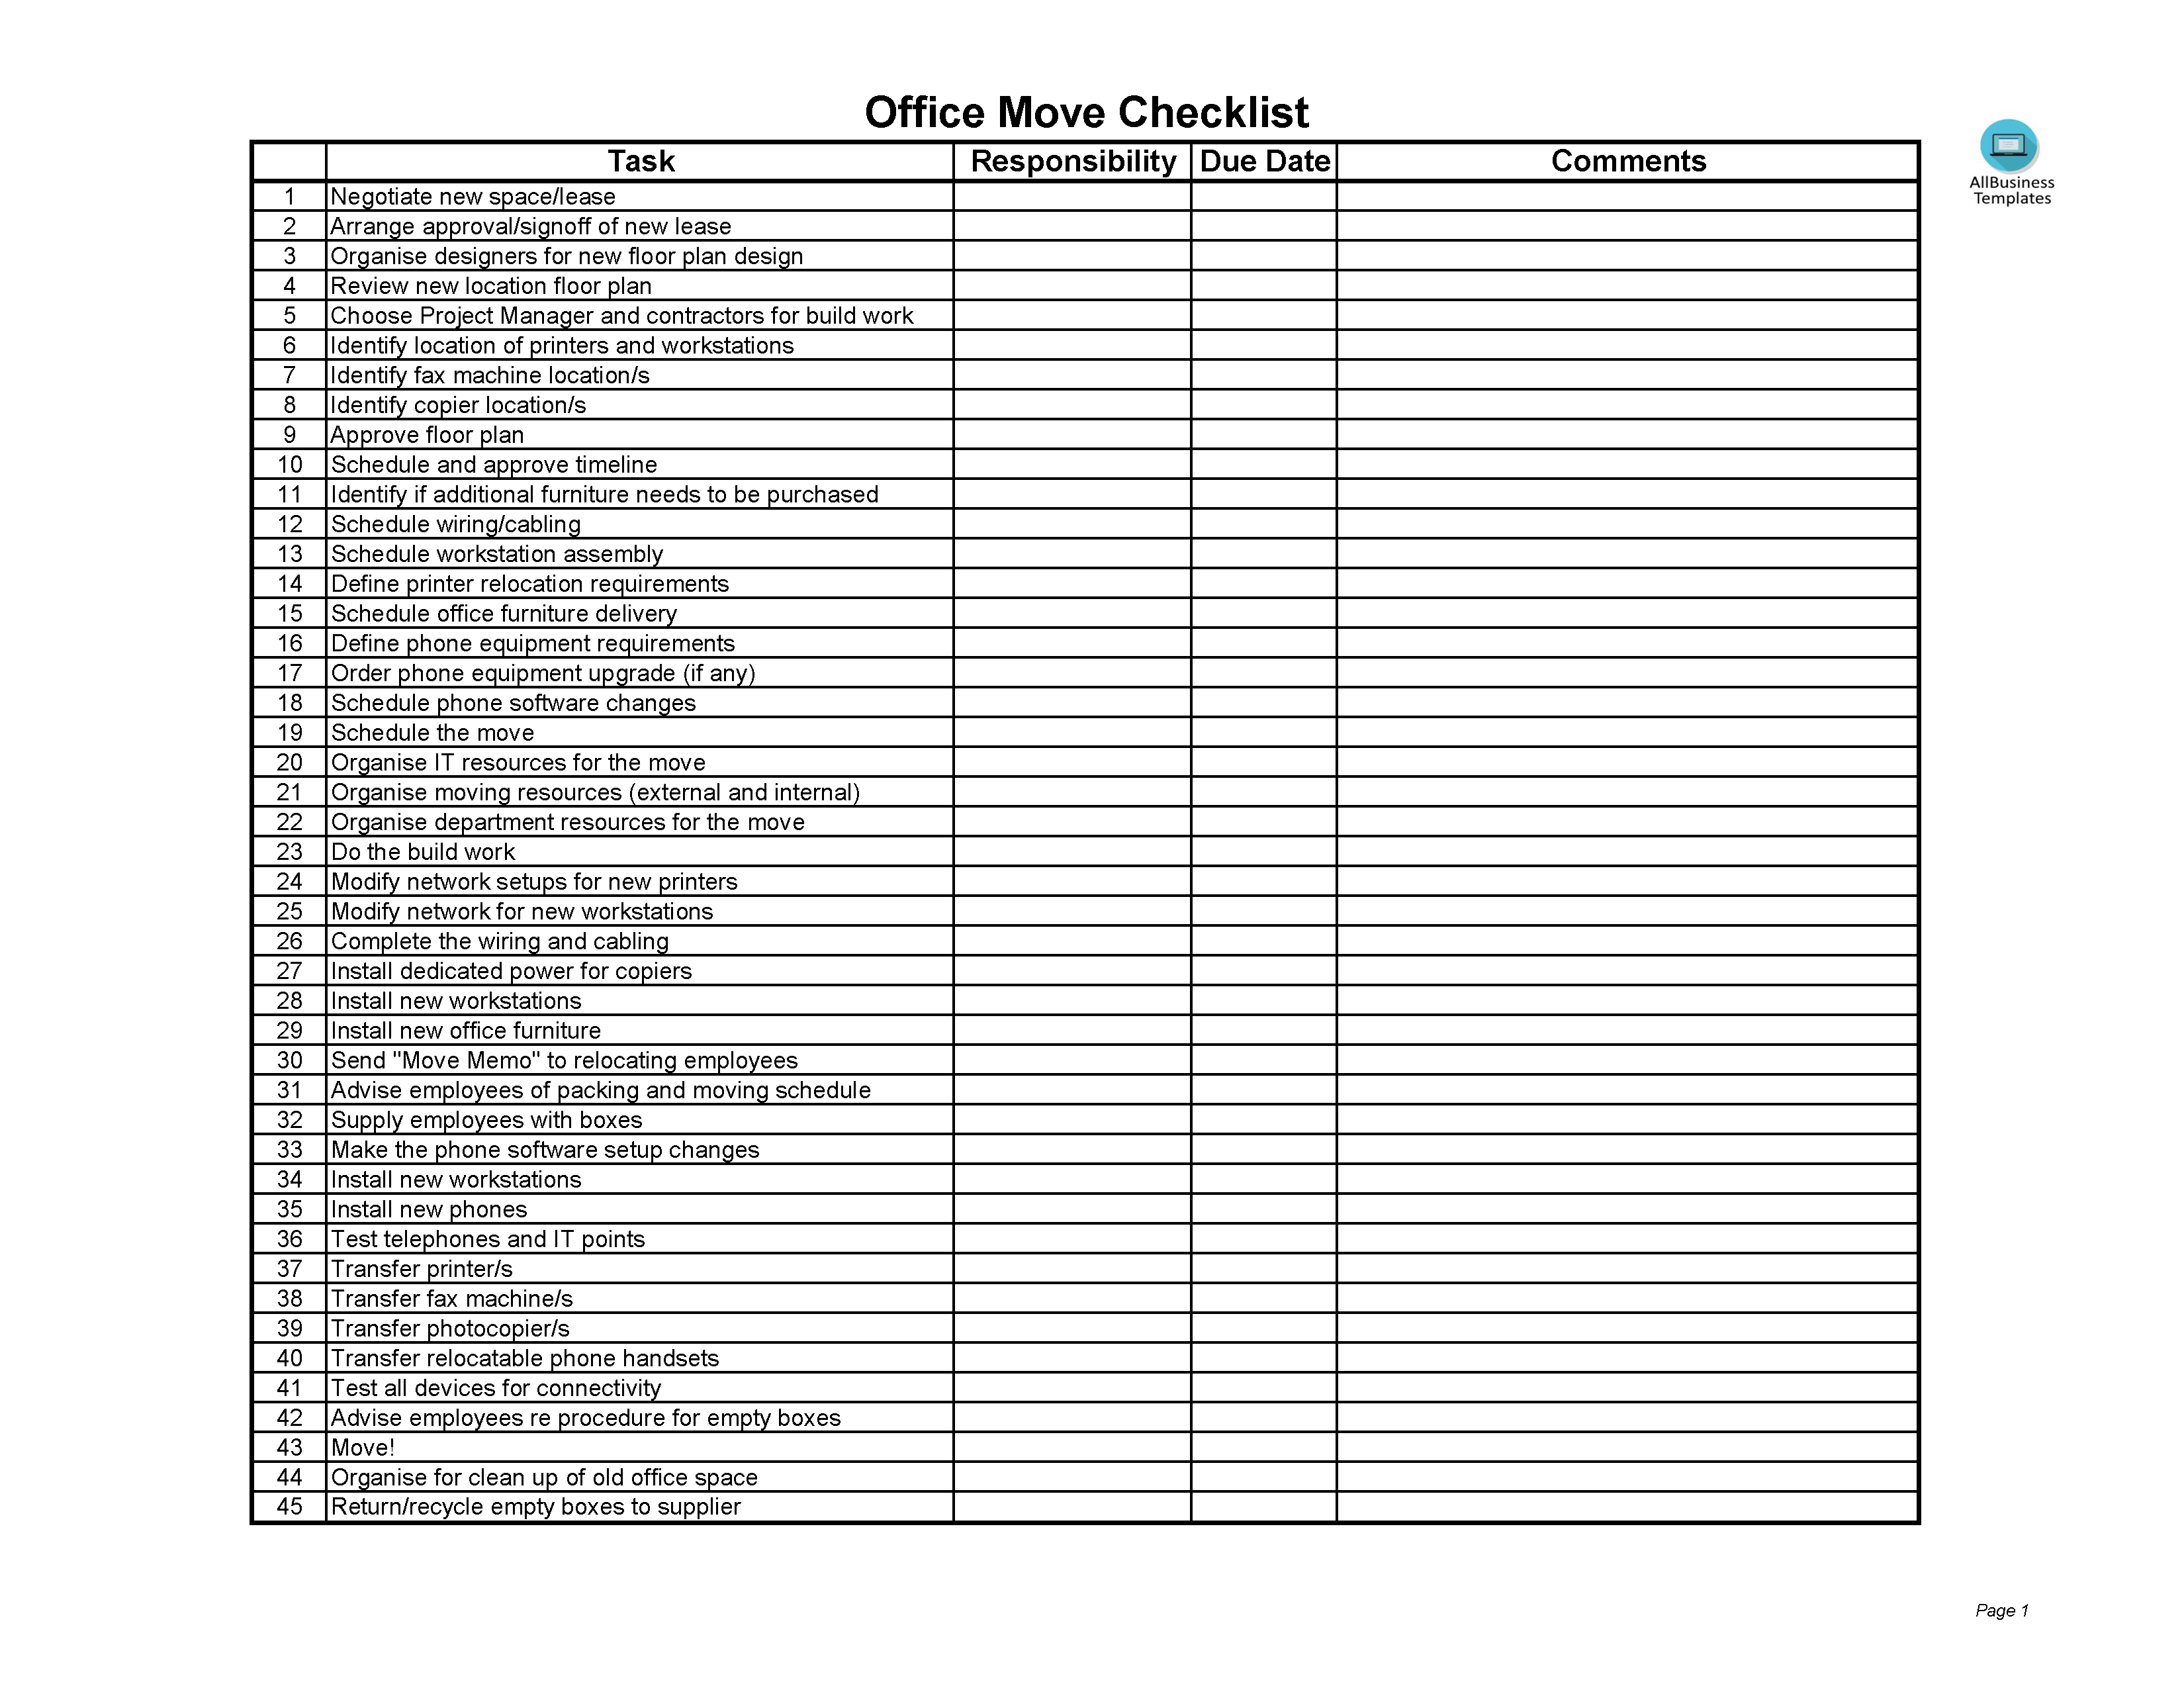 Office Move Checklist Excel main image